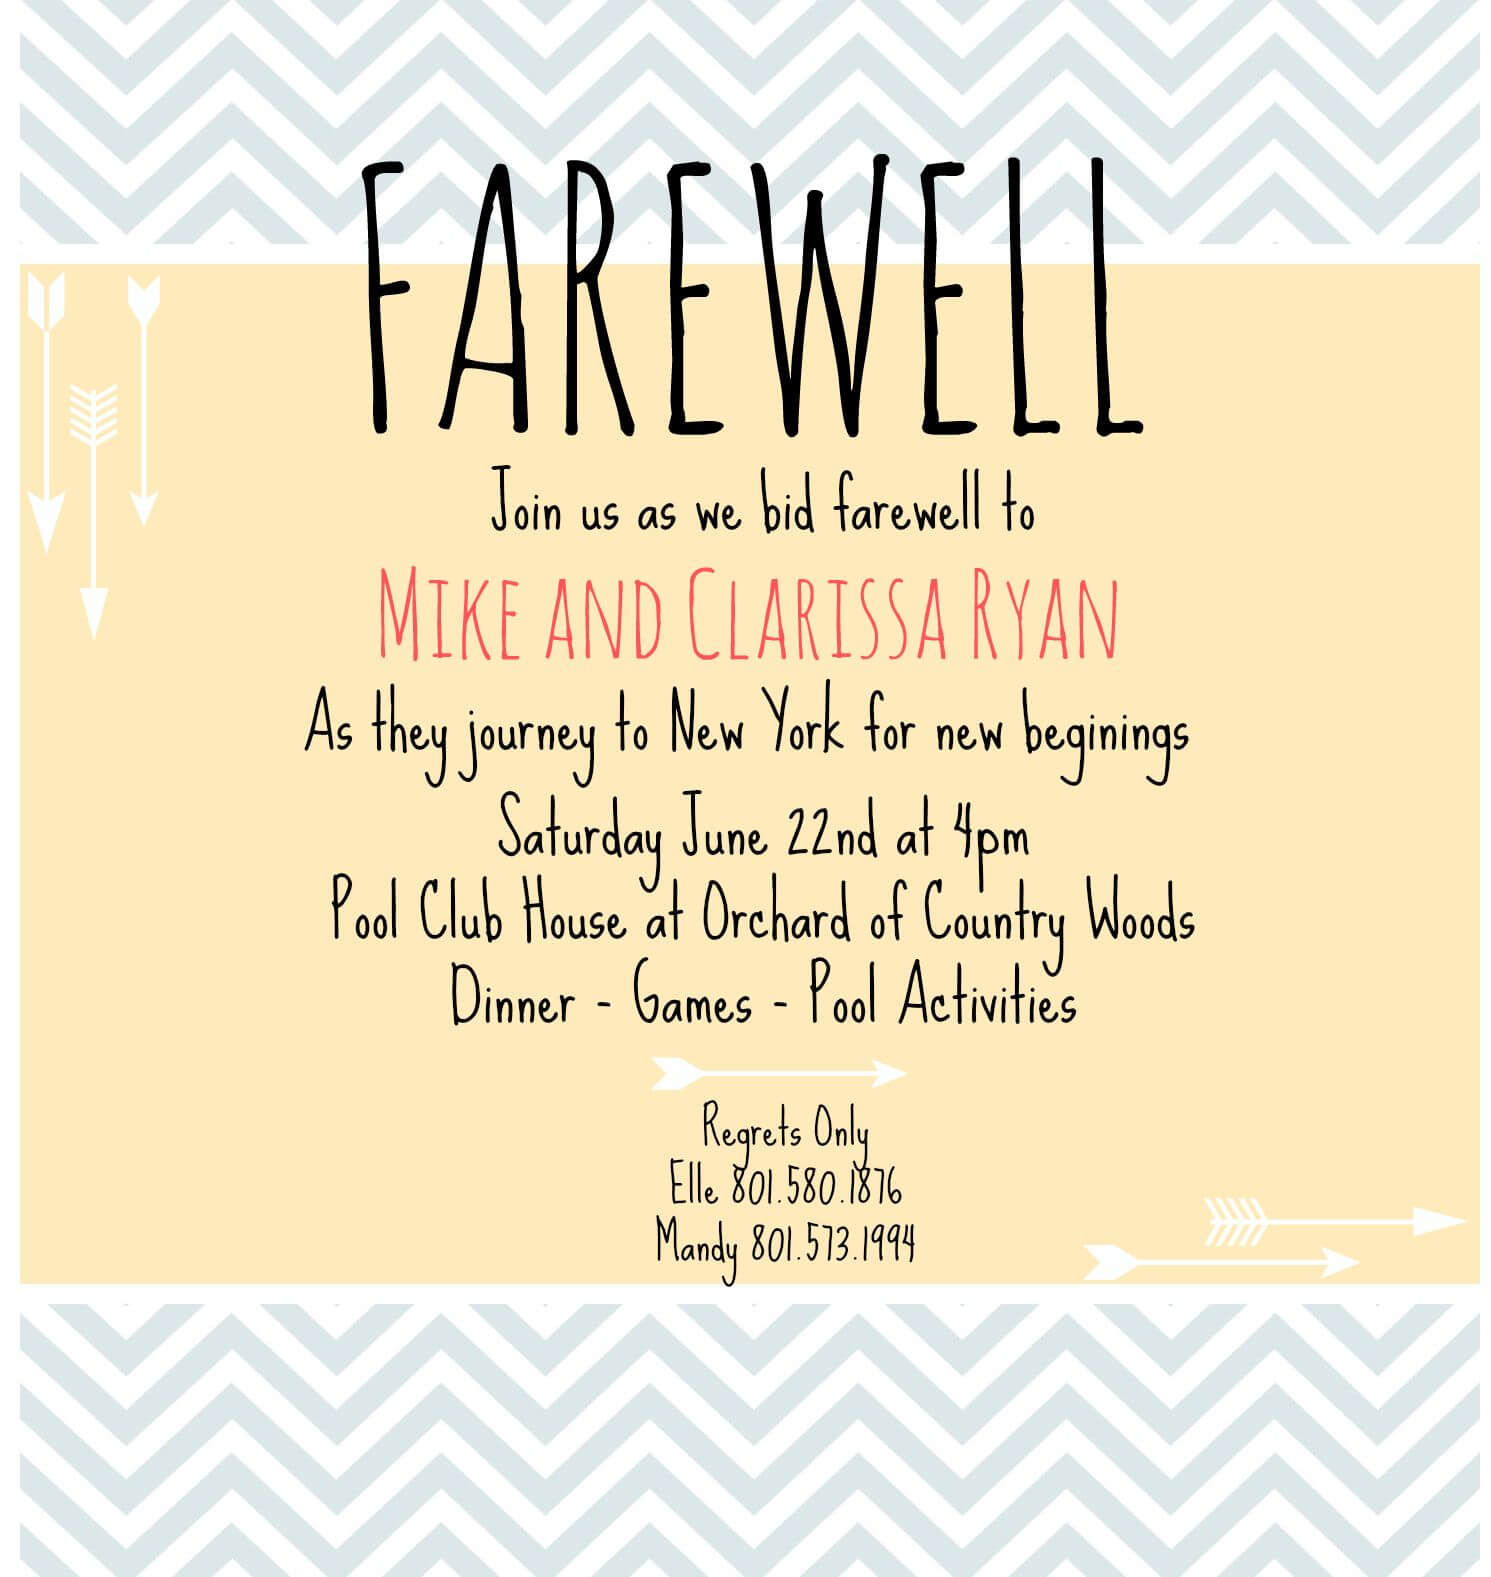 Farewell Invite | Going Away Party Invitations, Farewell Throughout Farewell Invitation Card Template